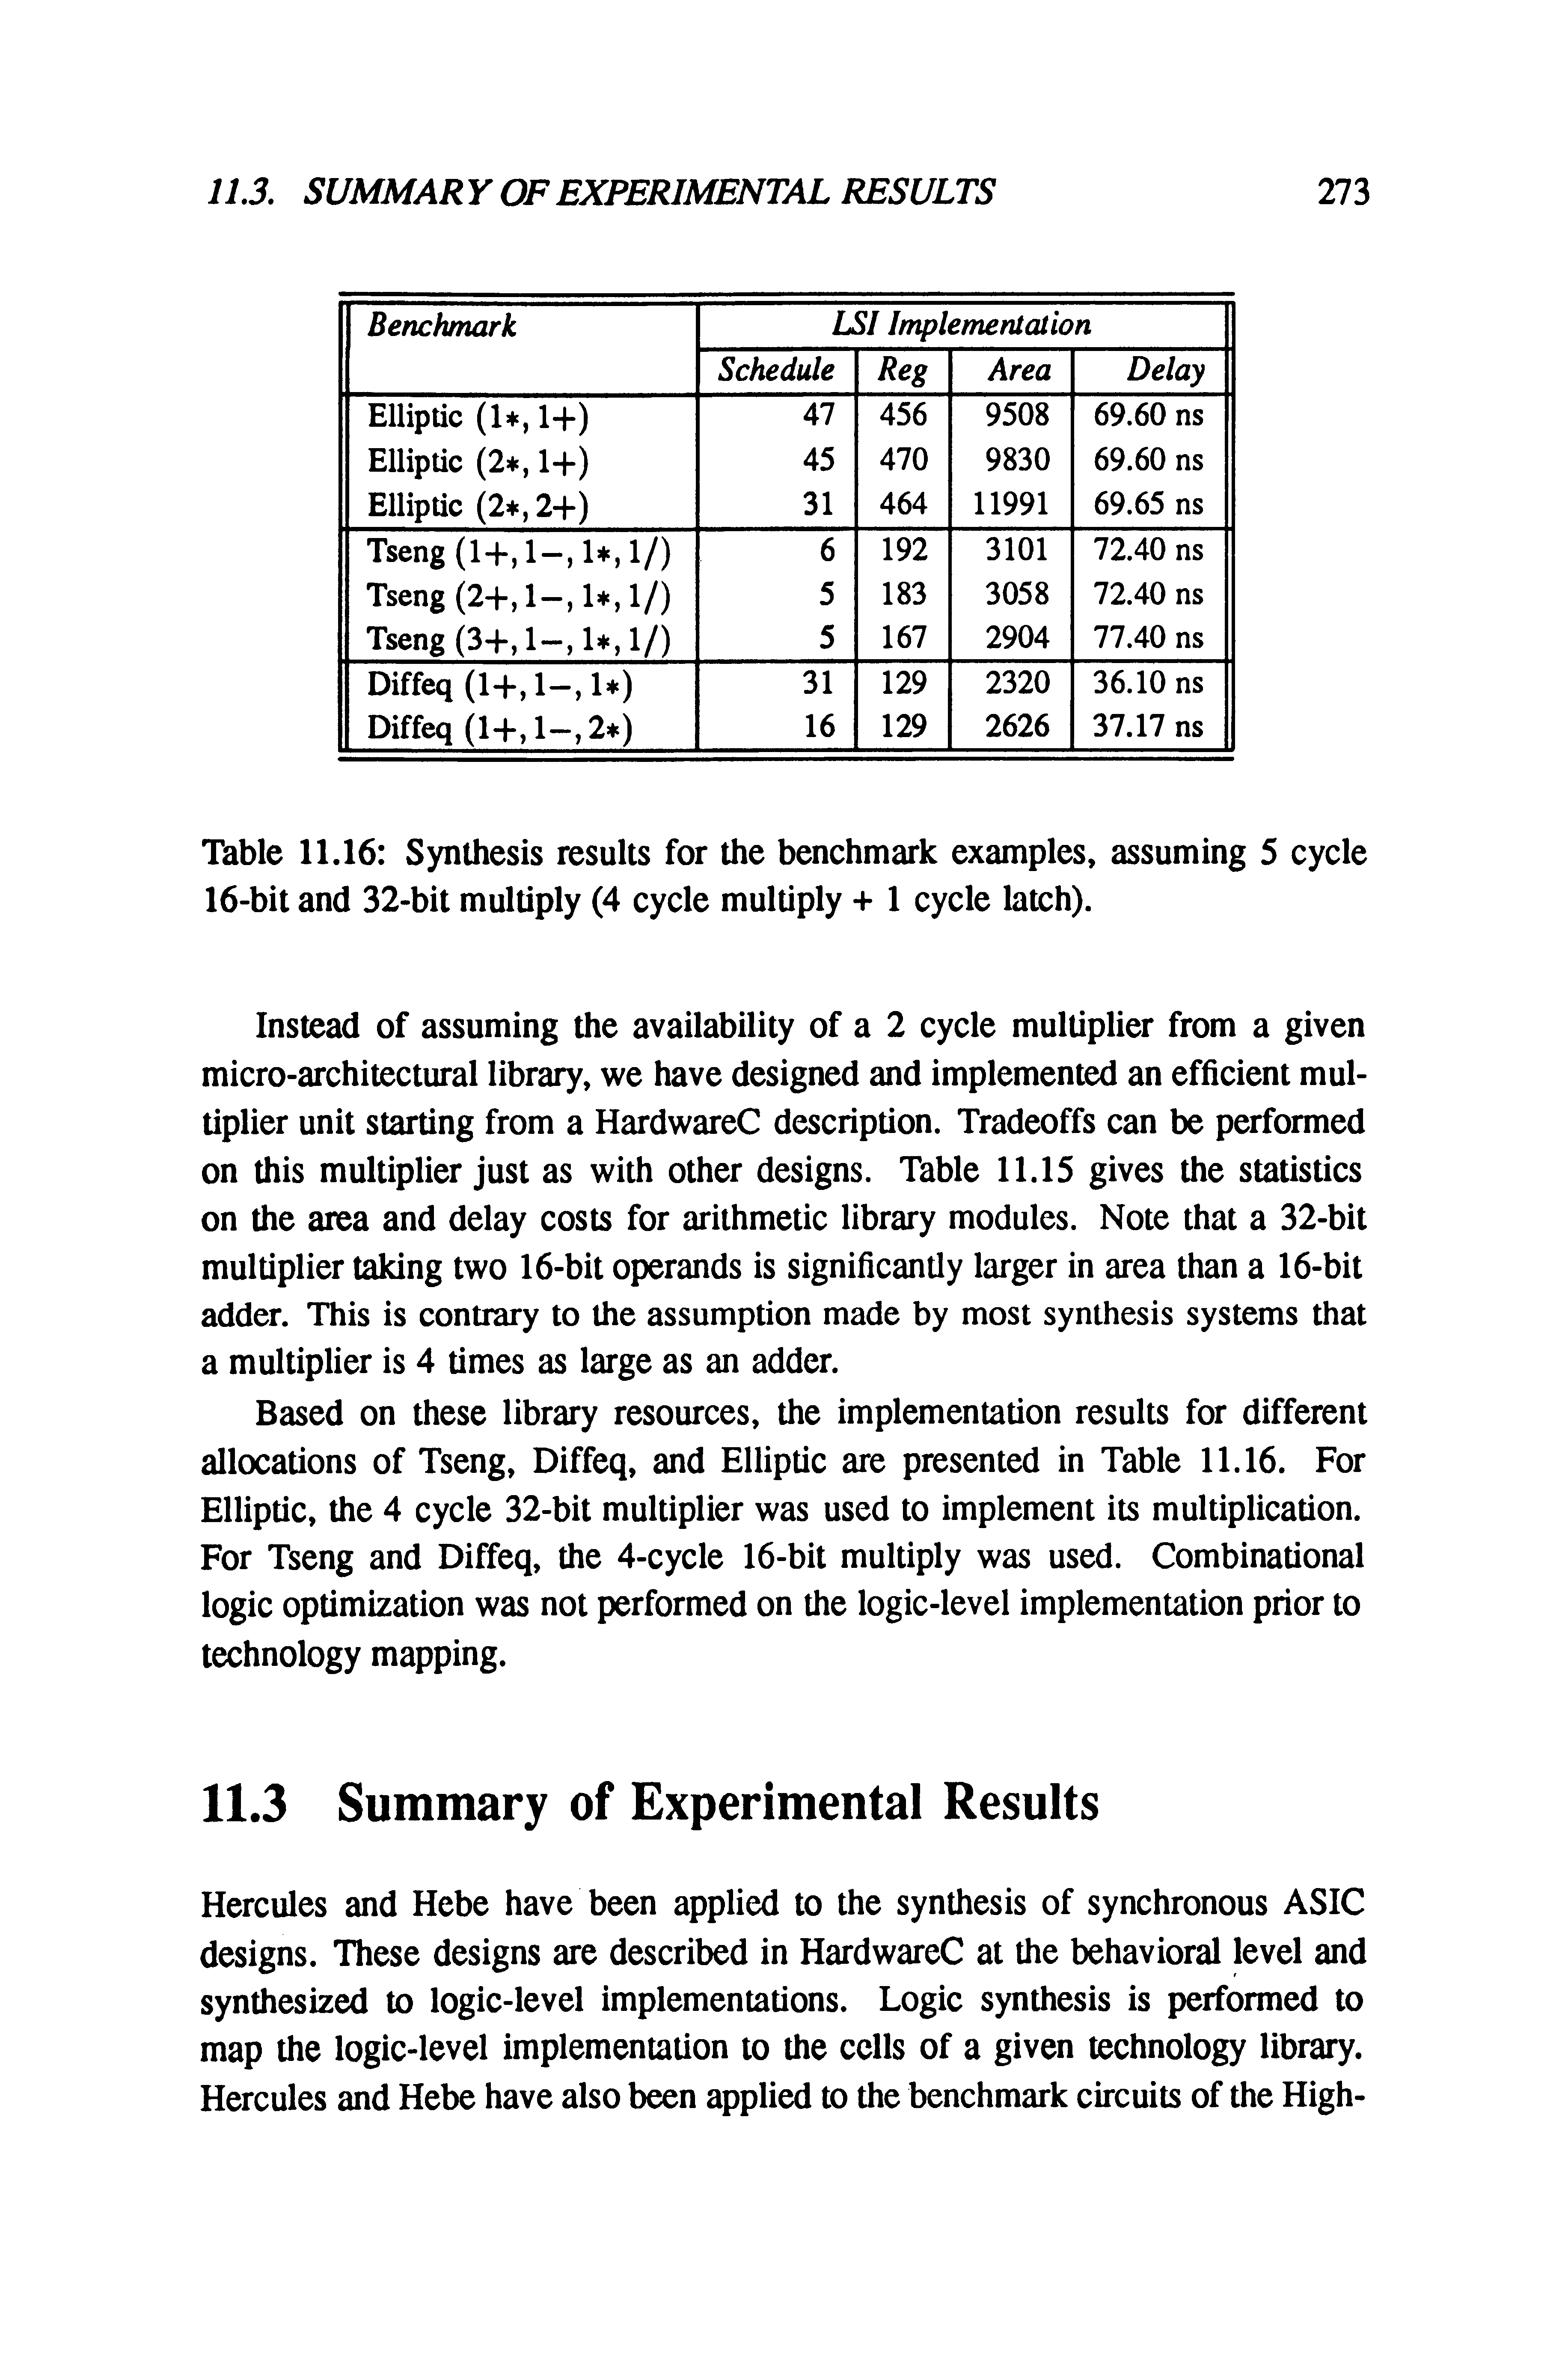 Table 11.16 Synthesis results for the benchmark examples, assuming 5 cycle 16-bit and 32-bit multiply (4 cycle multiply + 1 cycle latch).